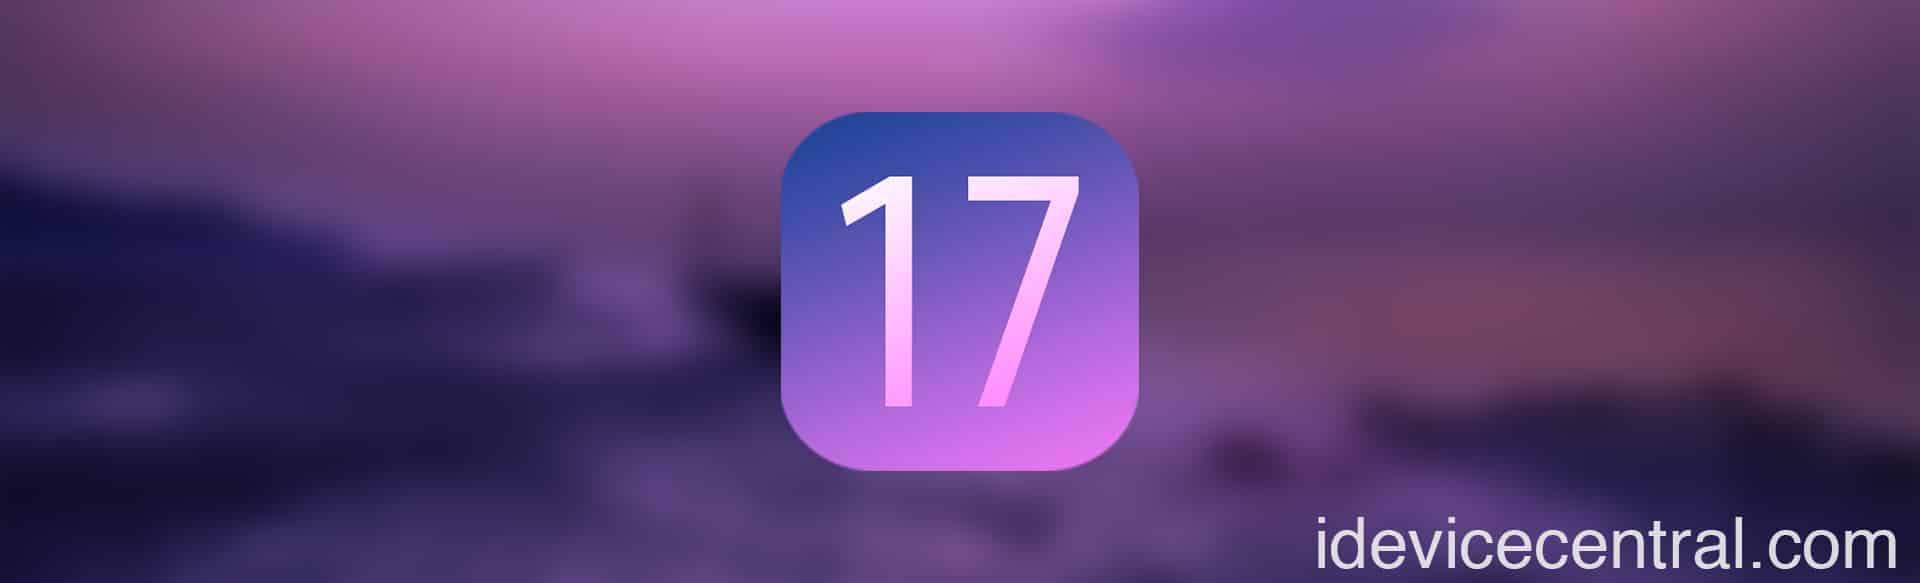 iOS 17 Beta for iPhone Available Today With These New Features